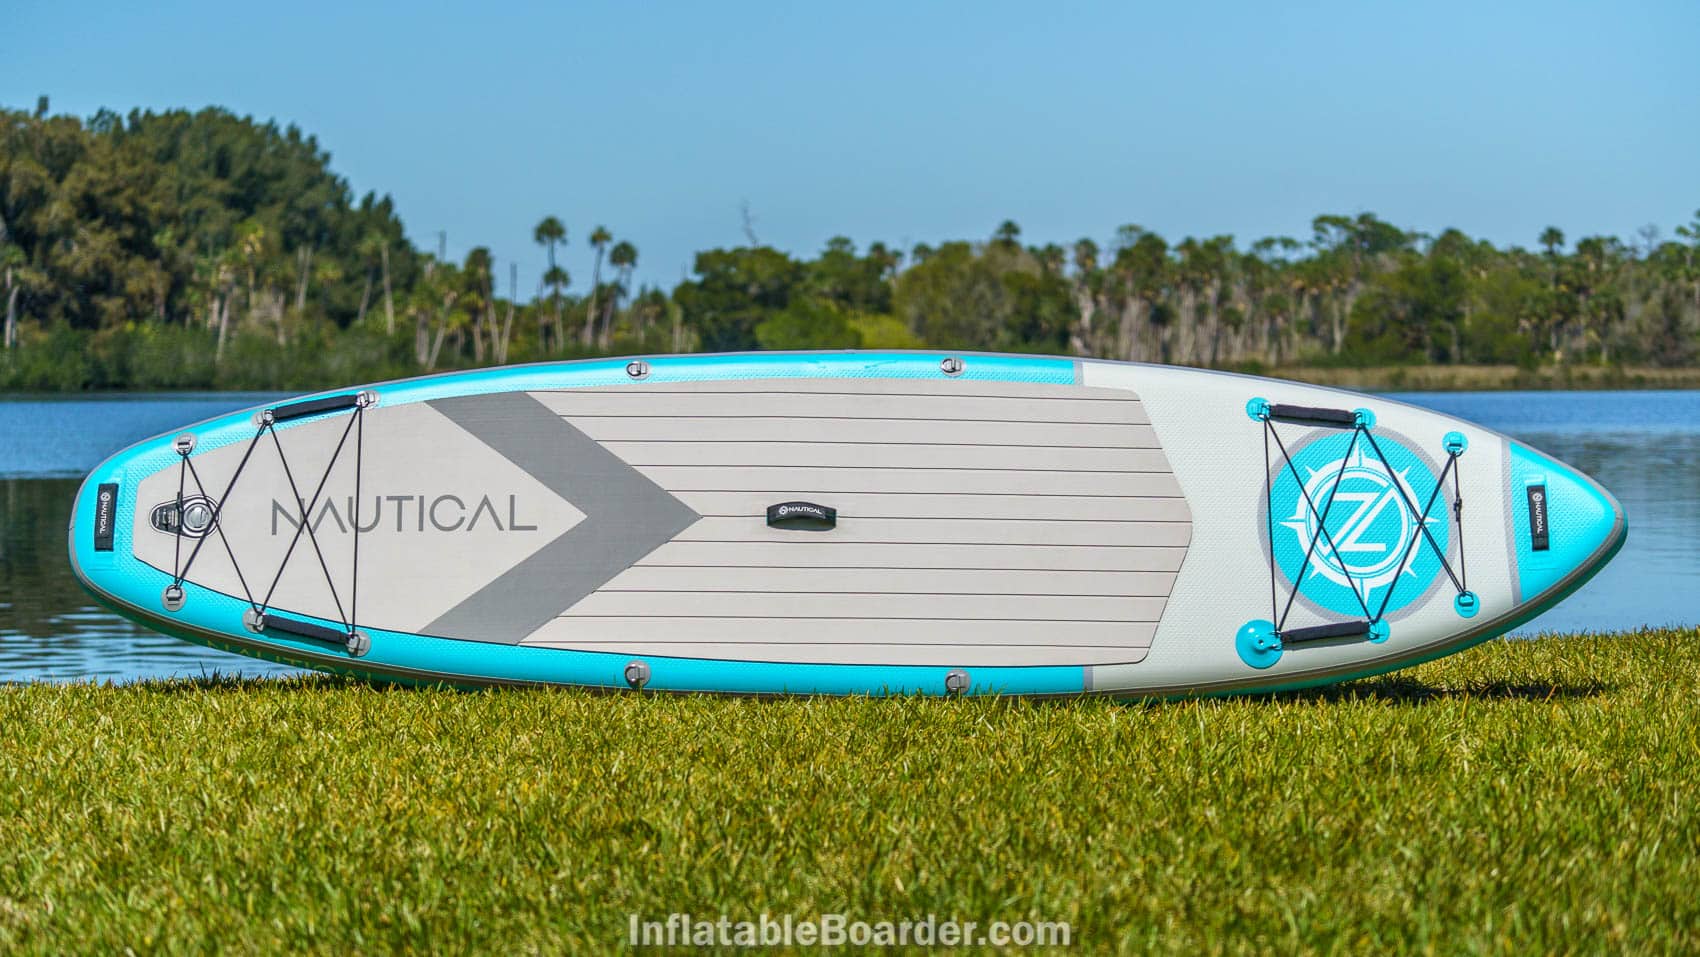 Top overview of the 2021 Nautical 11'6" in teal color option.